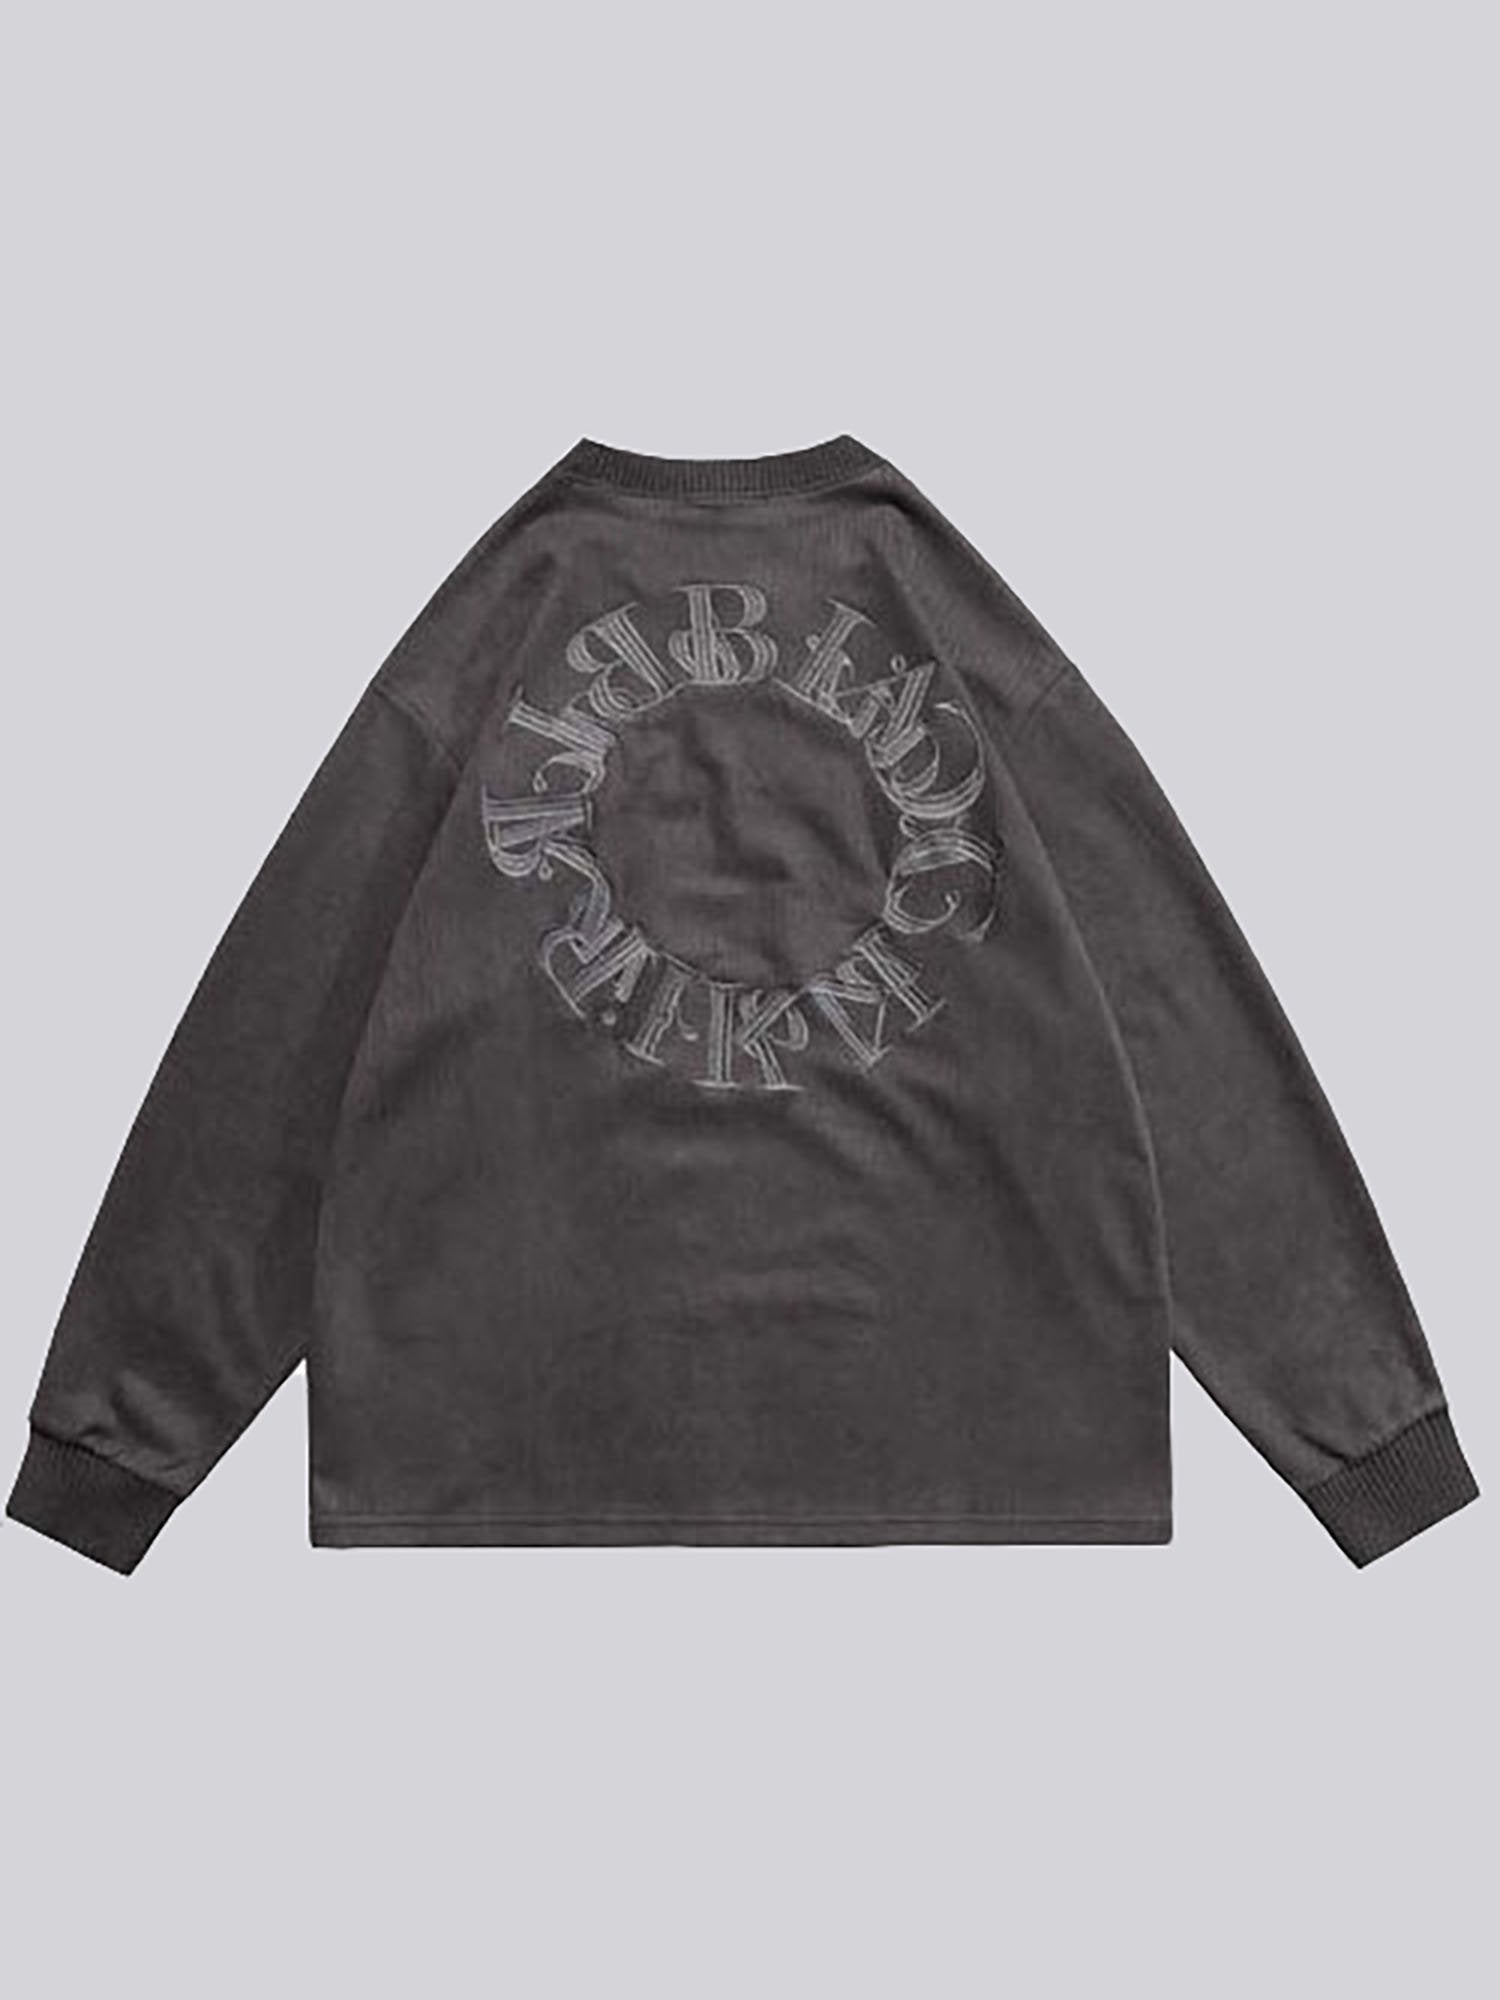 JUSTNOTAG Suede Fabric Letters Embroidery Sweatshirt